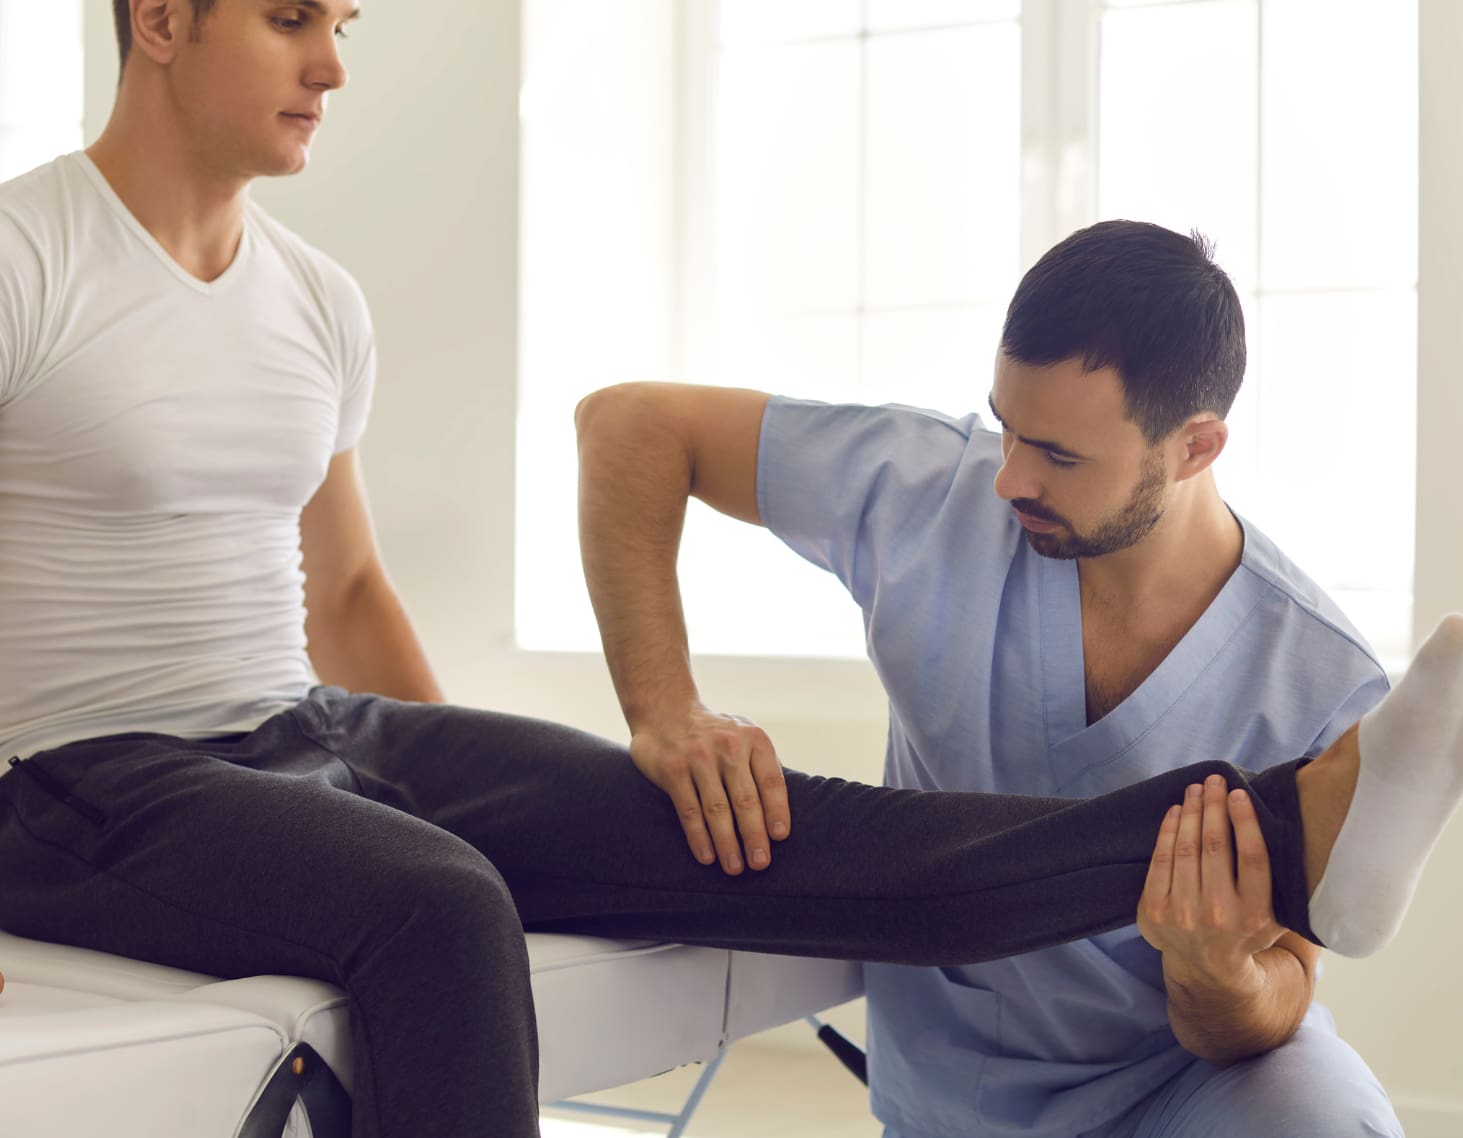 A physical therapy for sports injuries